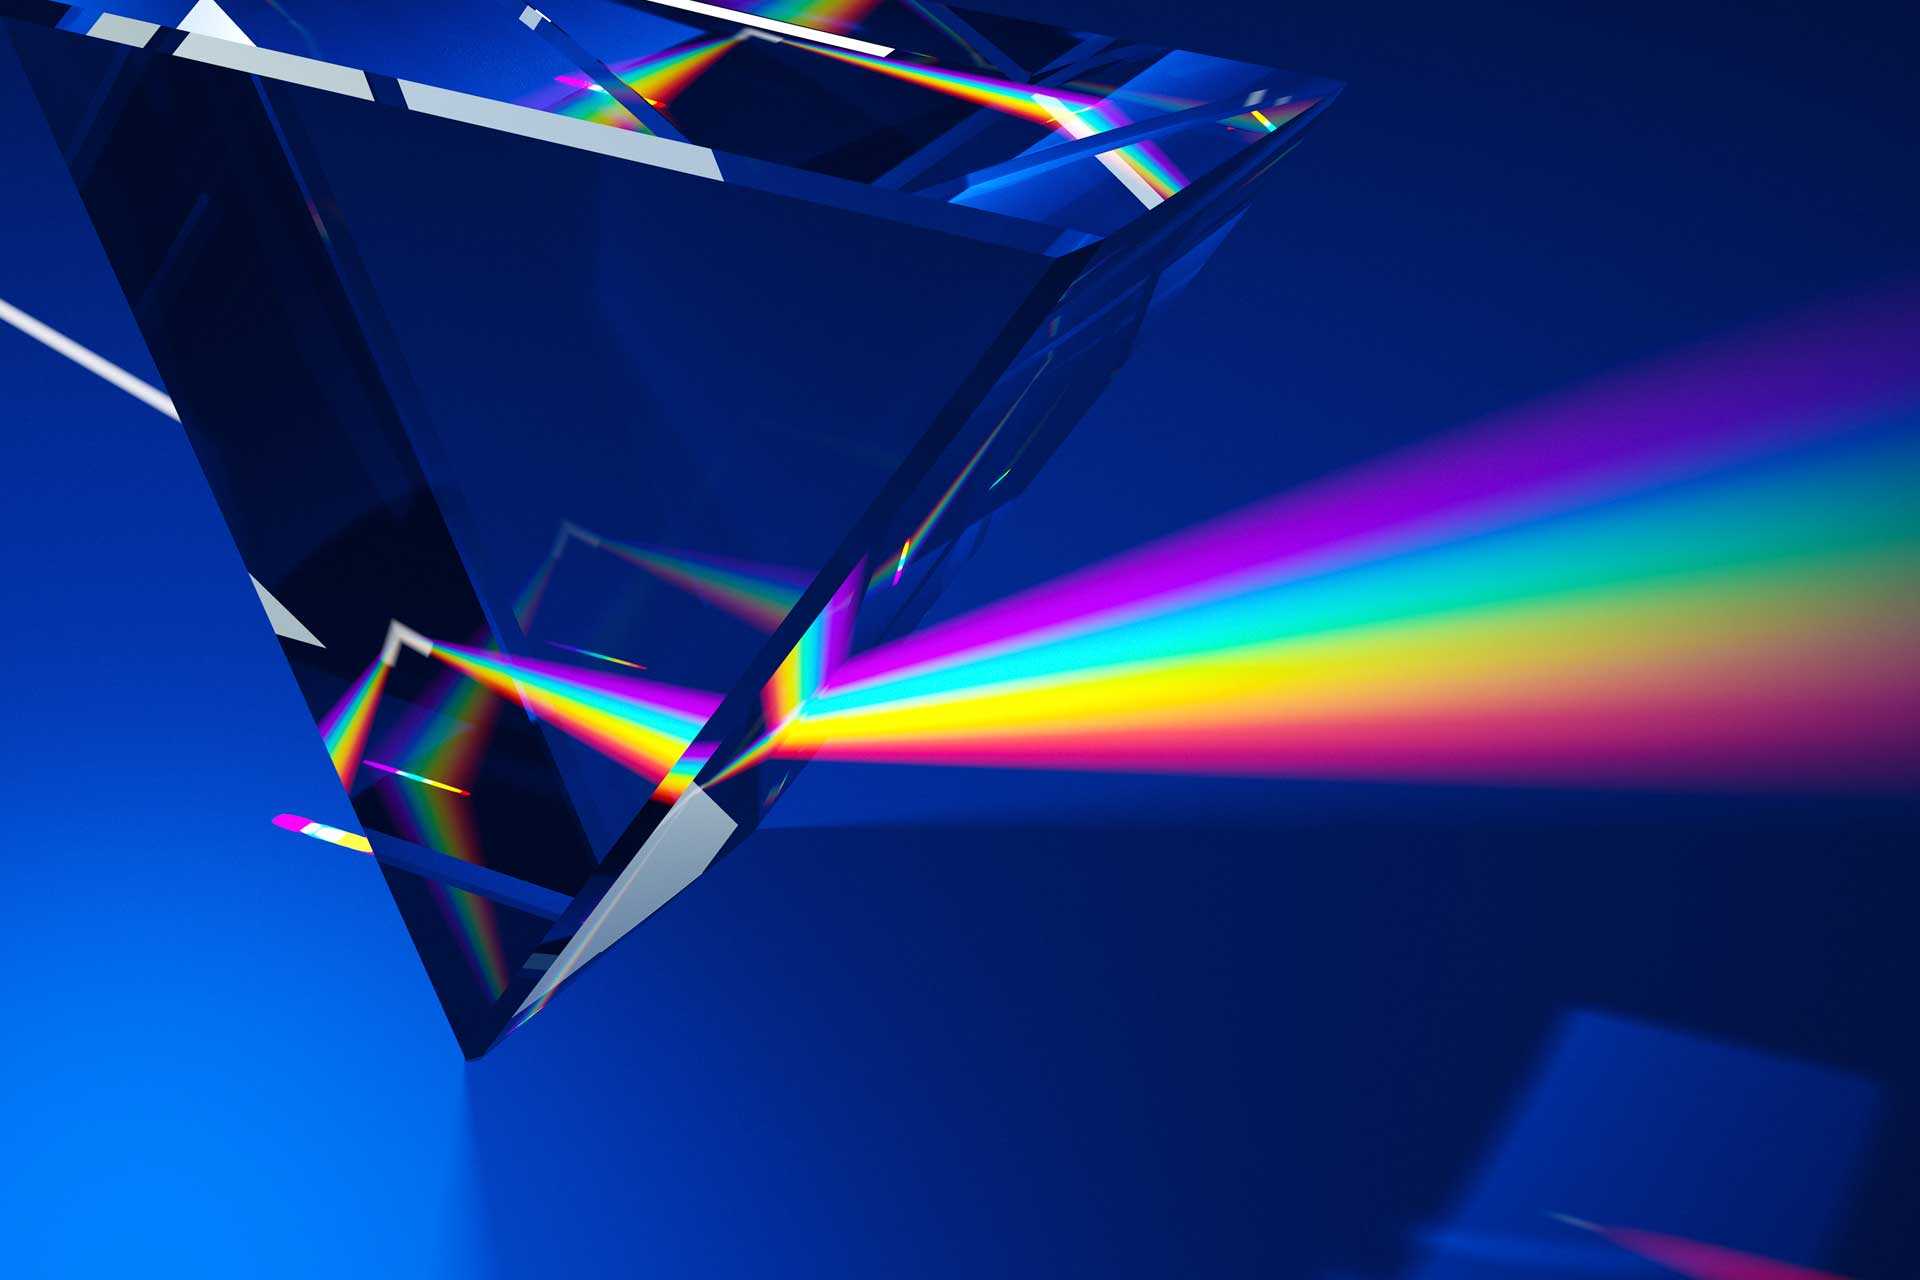 Reflected light through a prism